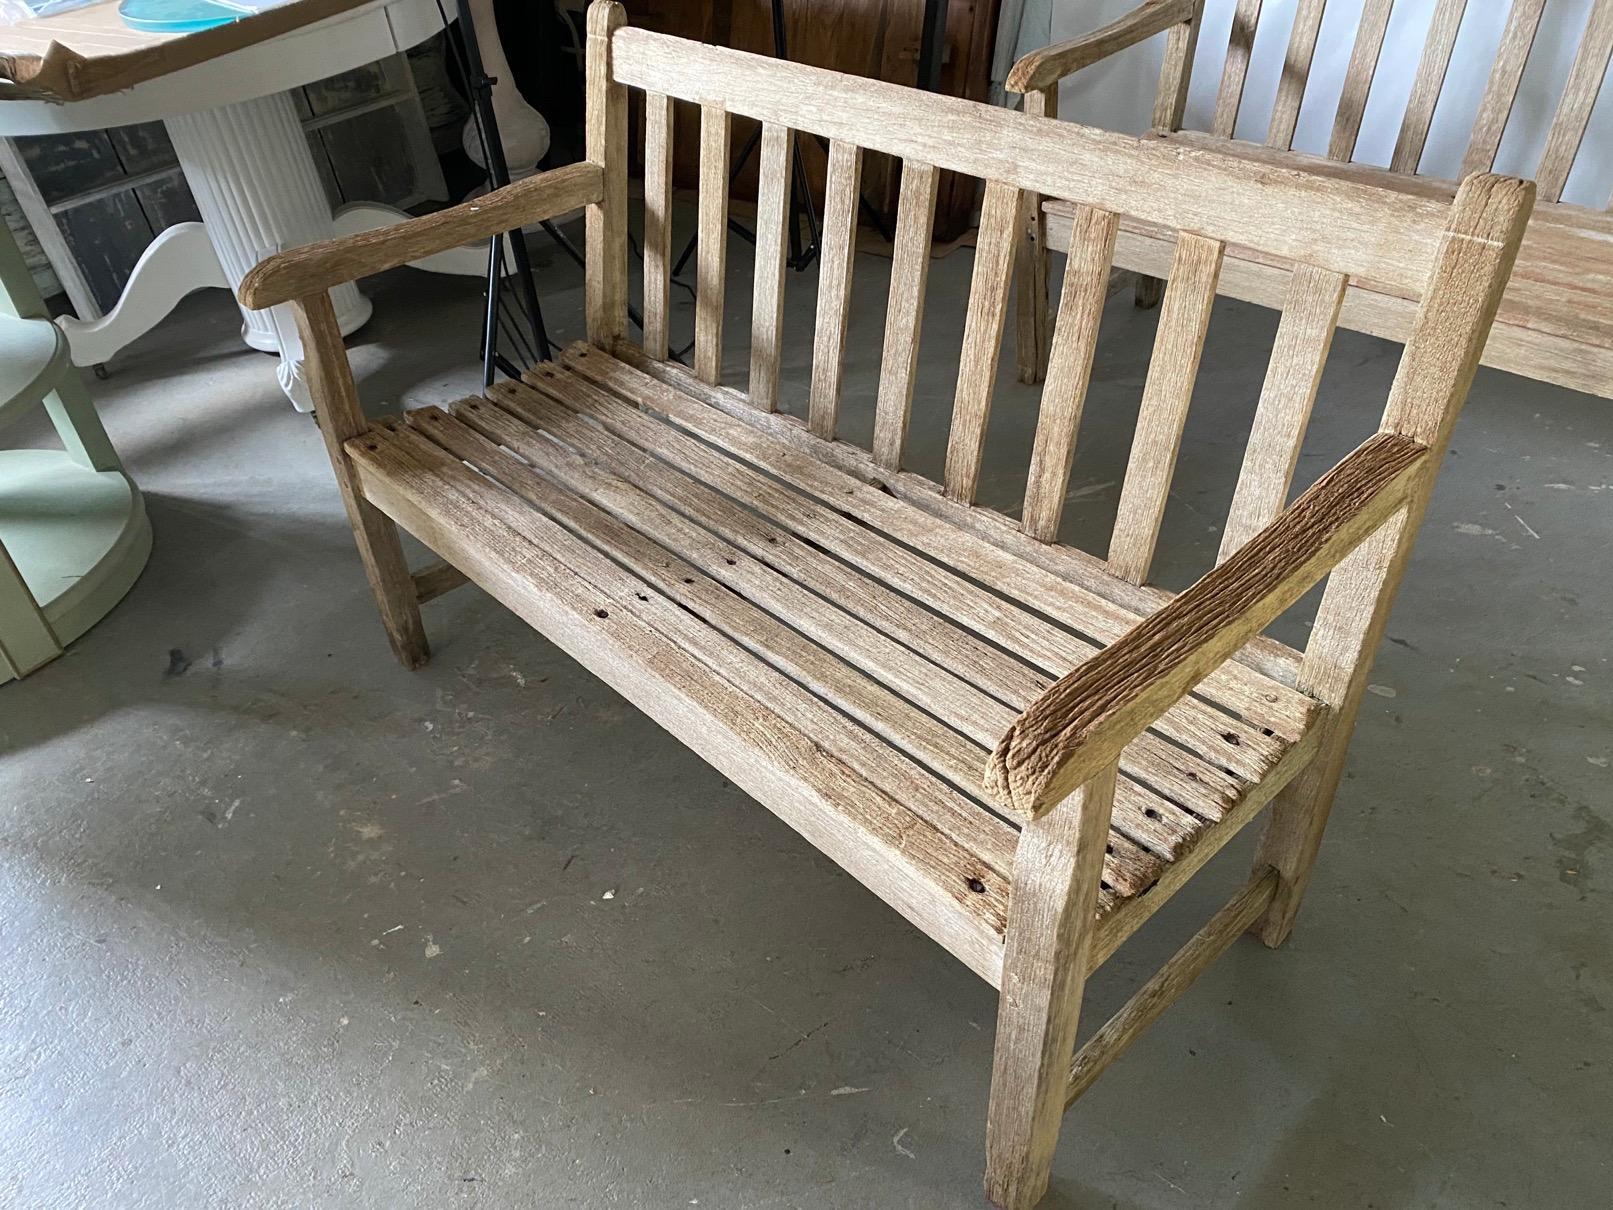 British Colonial Vintage Teak Garden Bench with Arms